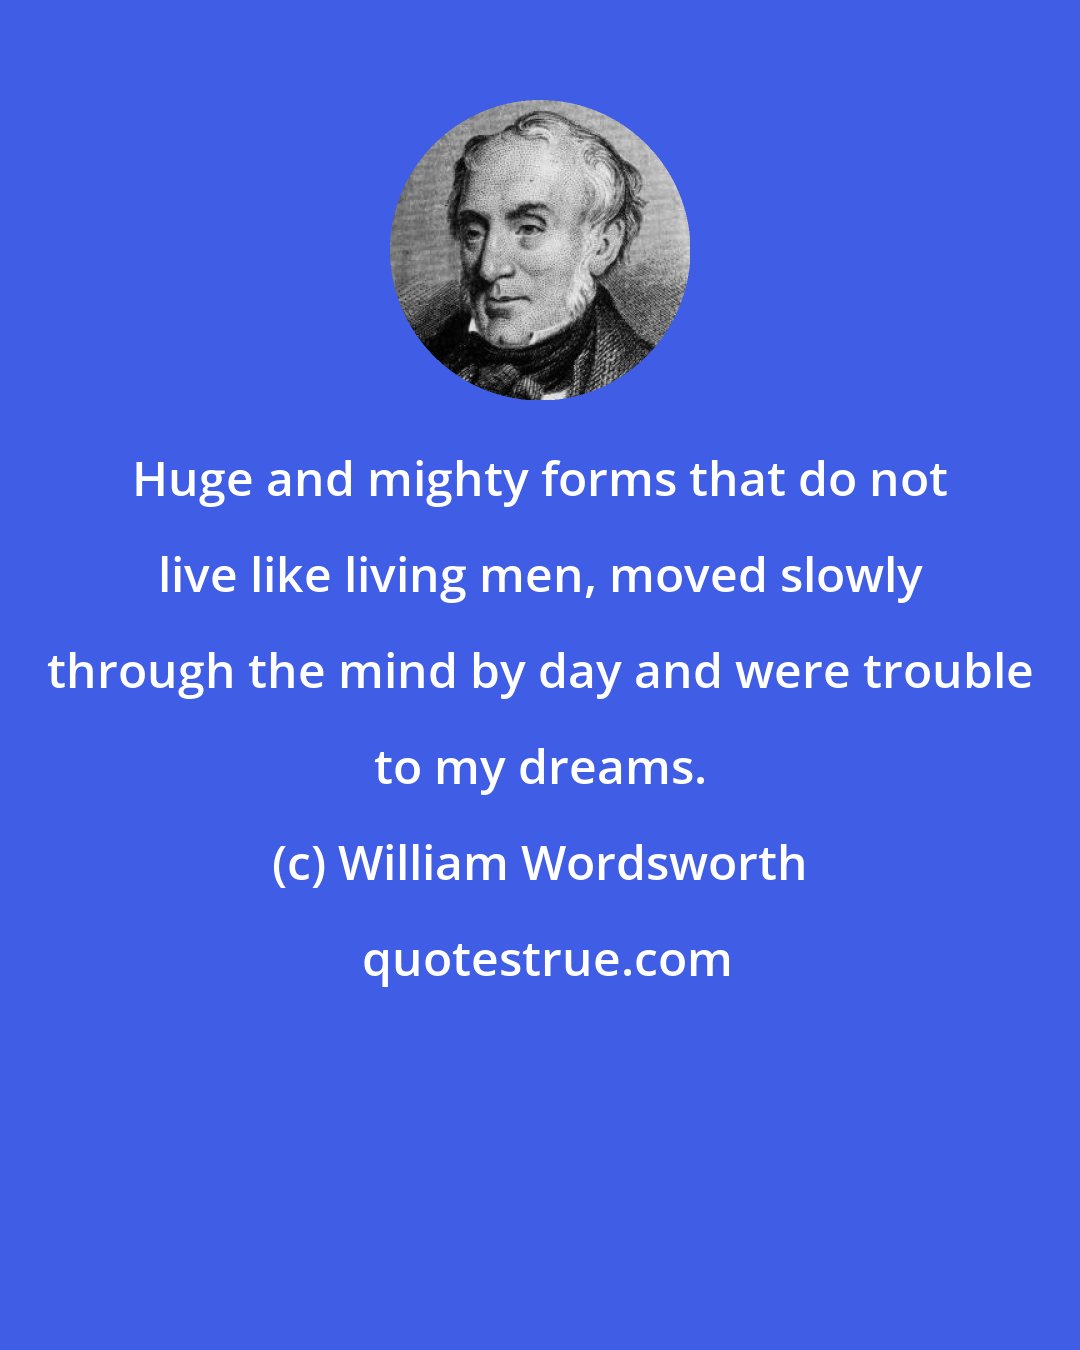 William Wordsworth: Huge and mighty forms that do not live like living men, moved slowly through the mind by day and were trouble to my dreams.